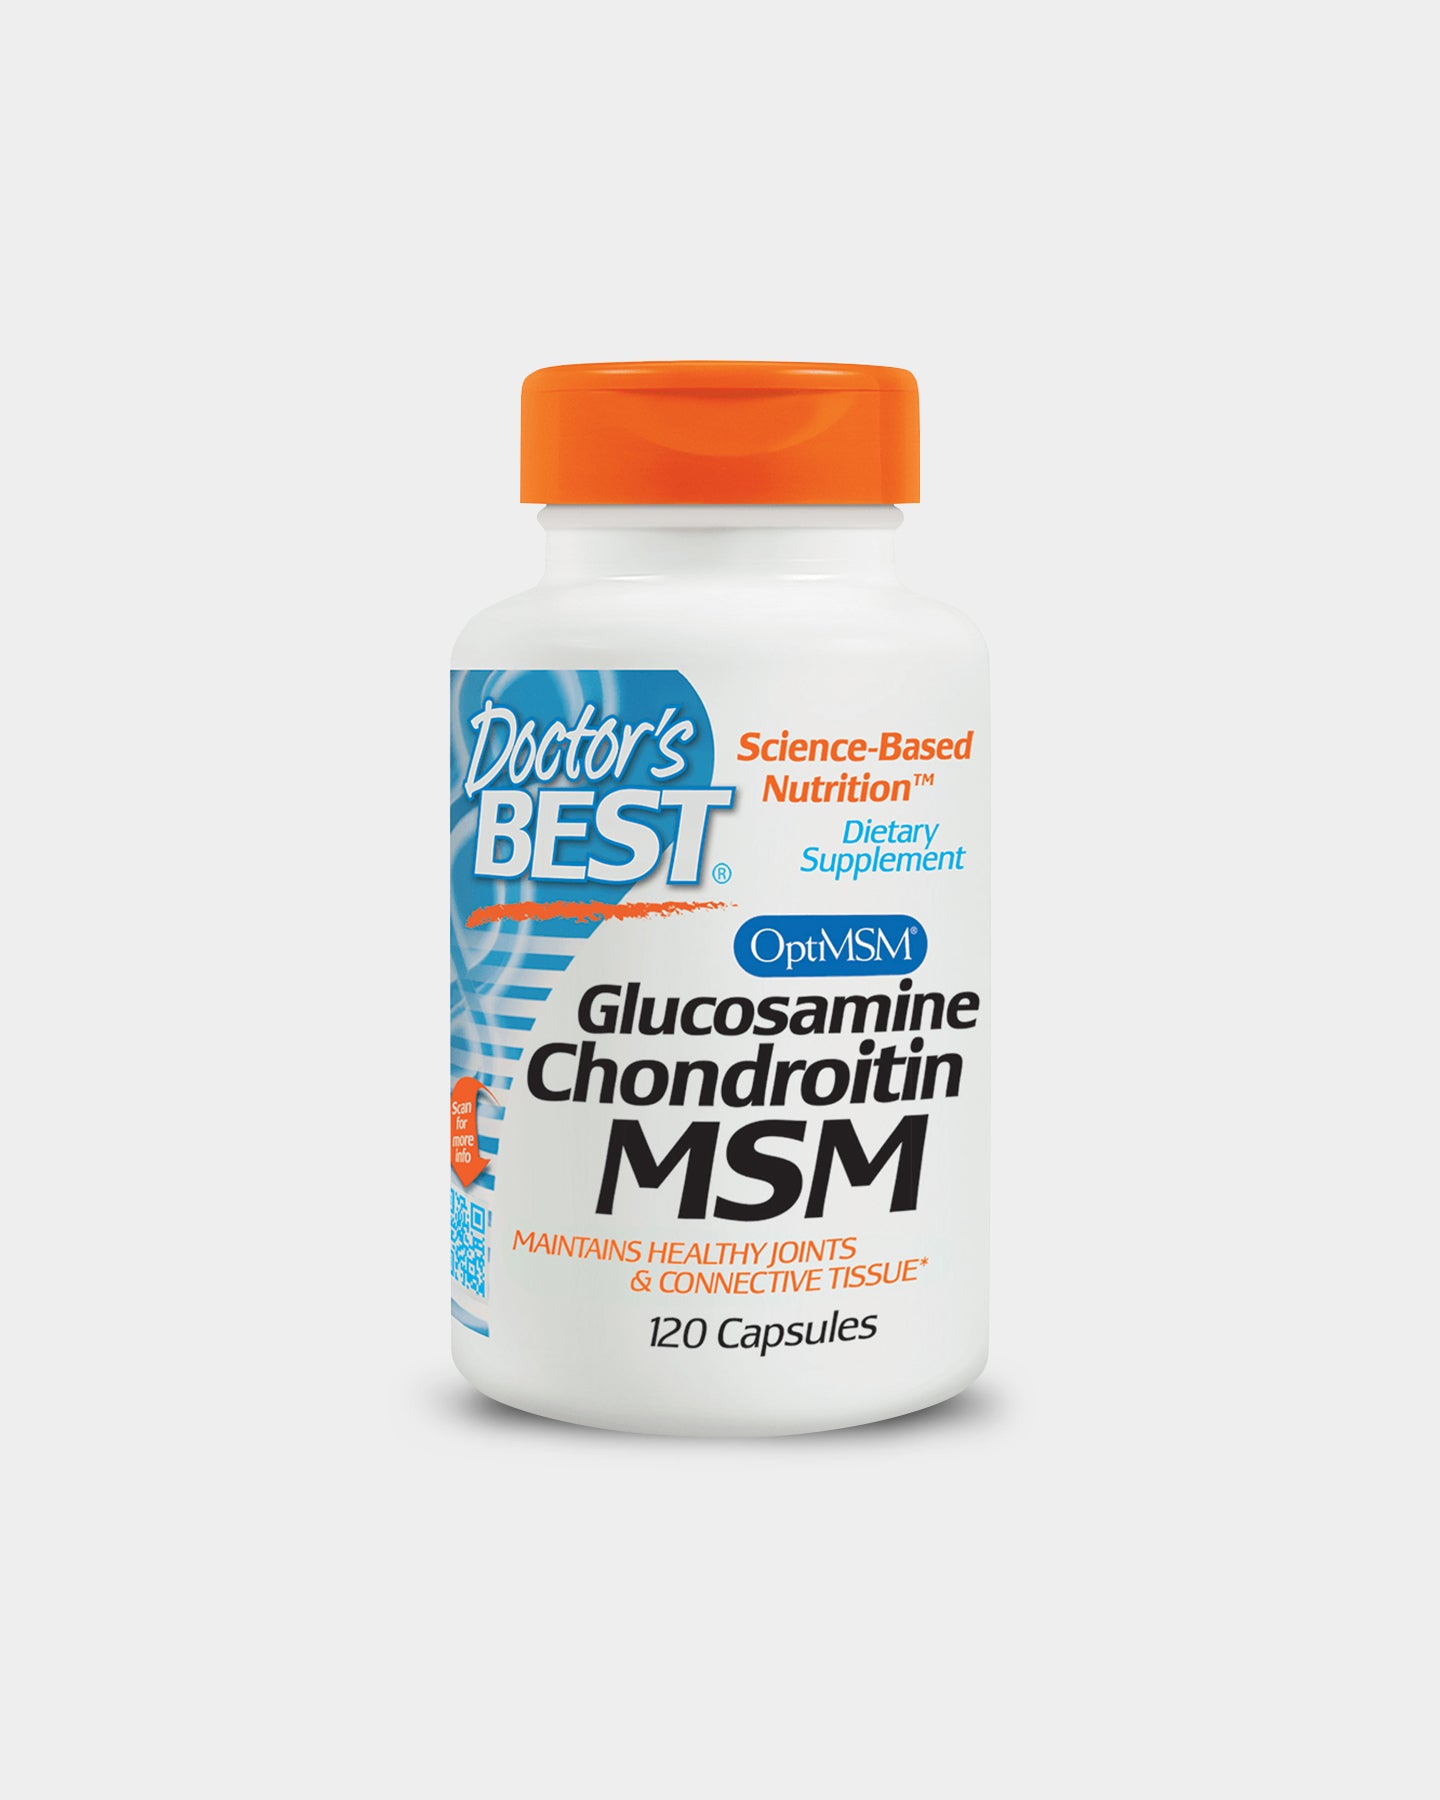 Doctor's Best Glucosamine Chondroitin MSM - Unflavored (360 Capsules)